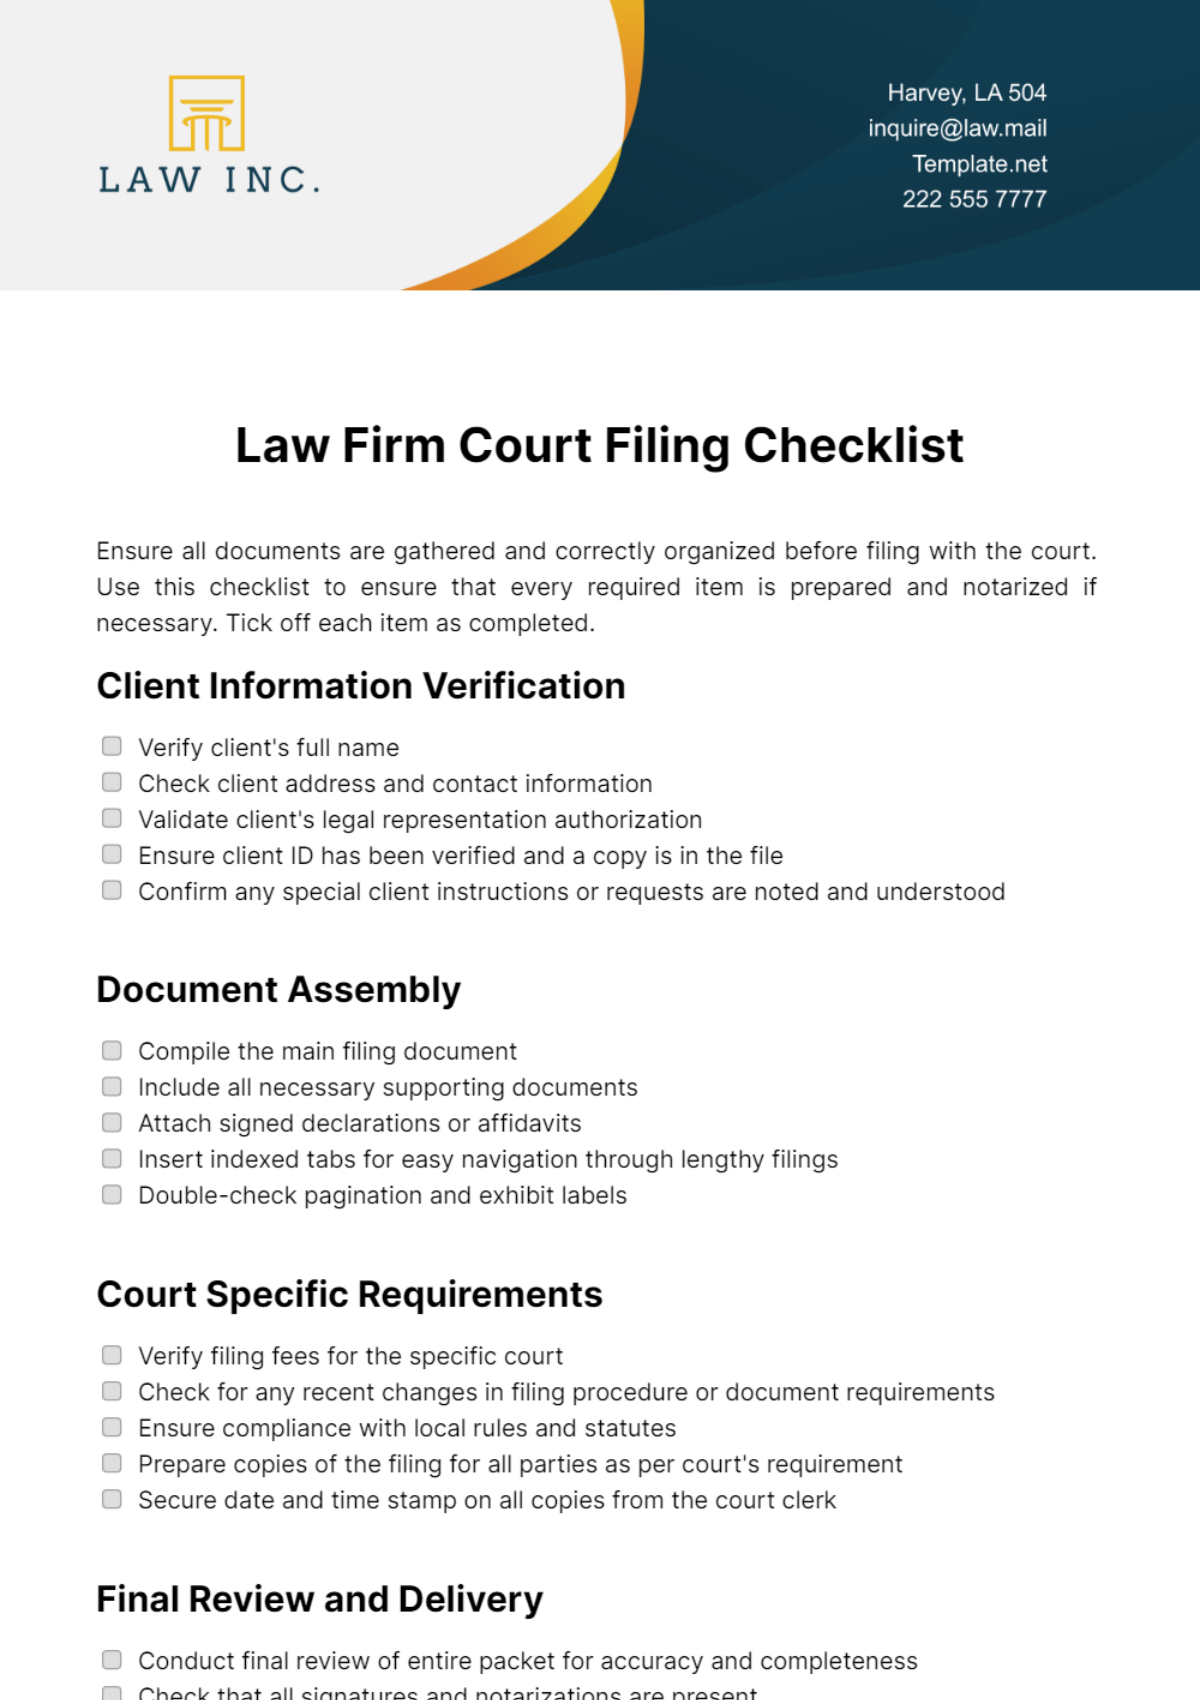 Law Firm Court Filing Checklist Template